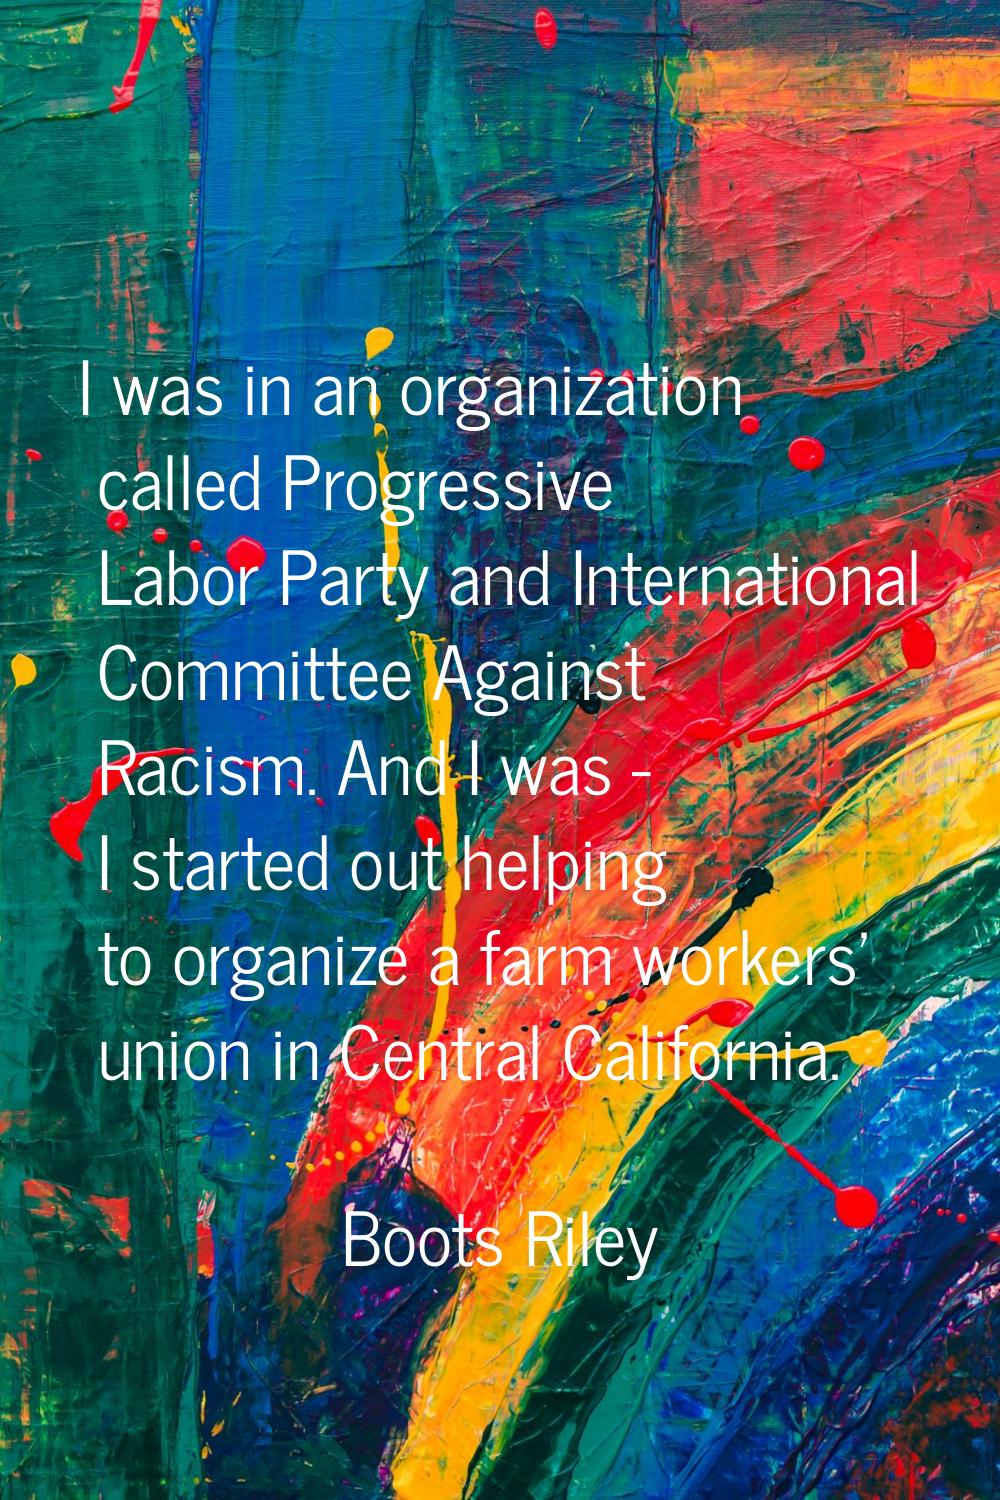 I was in an organization called Progressive Labor Party and International Committee Against Racism.